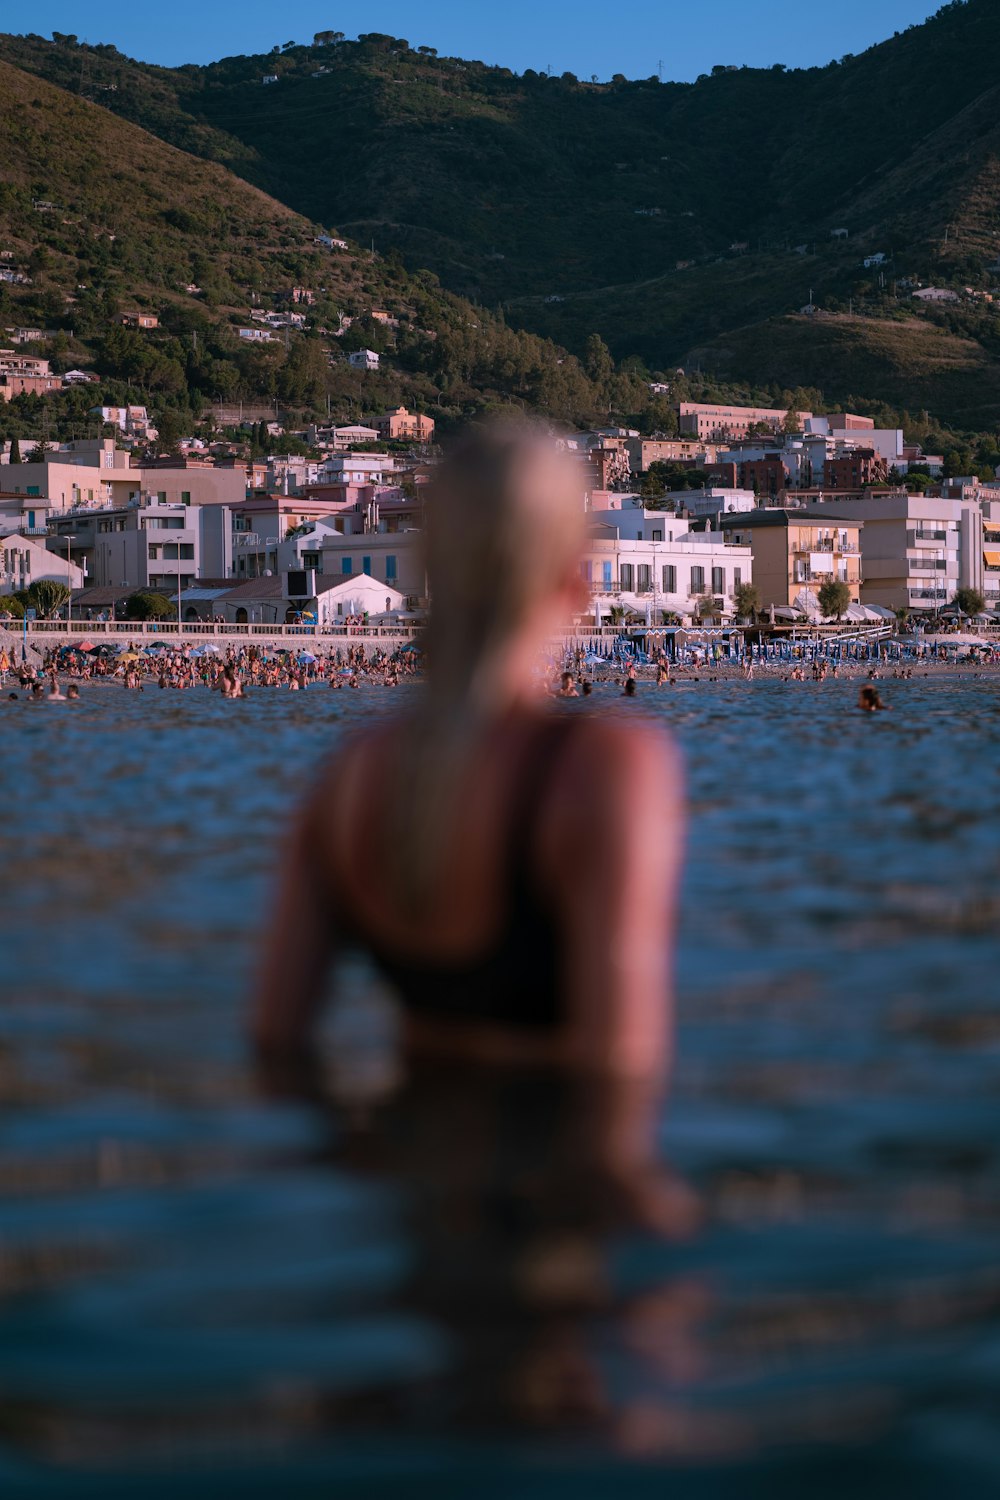 a person in the water with a city in the background